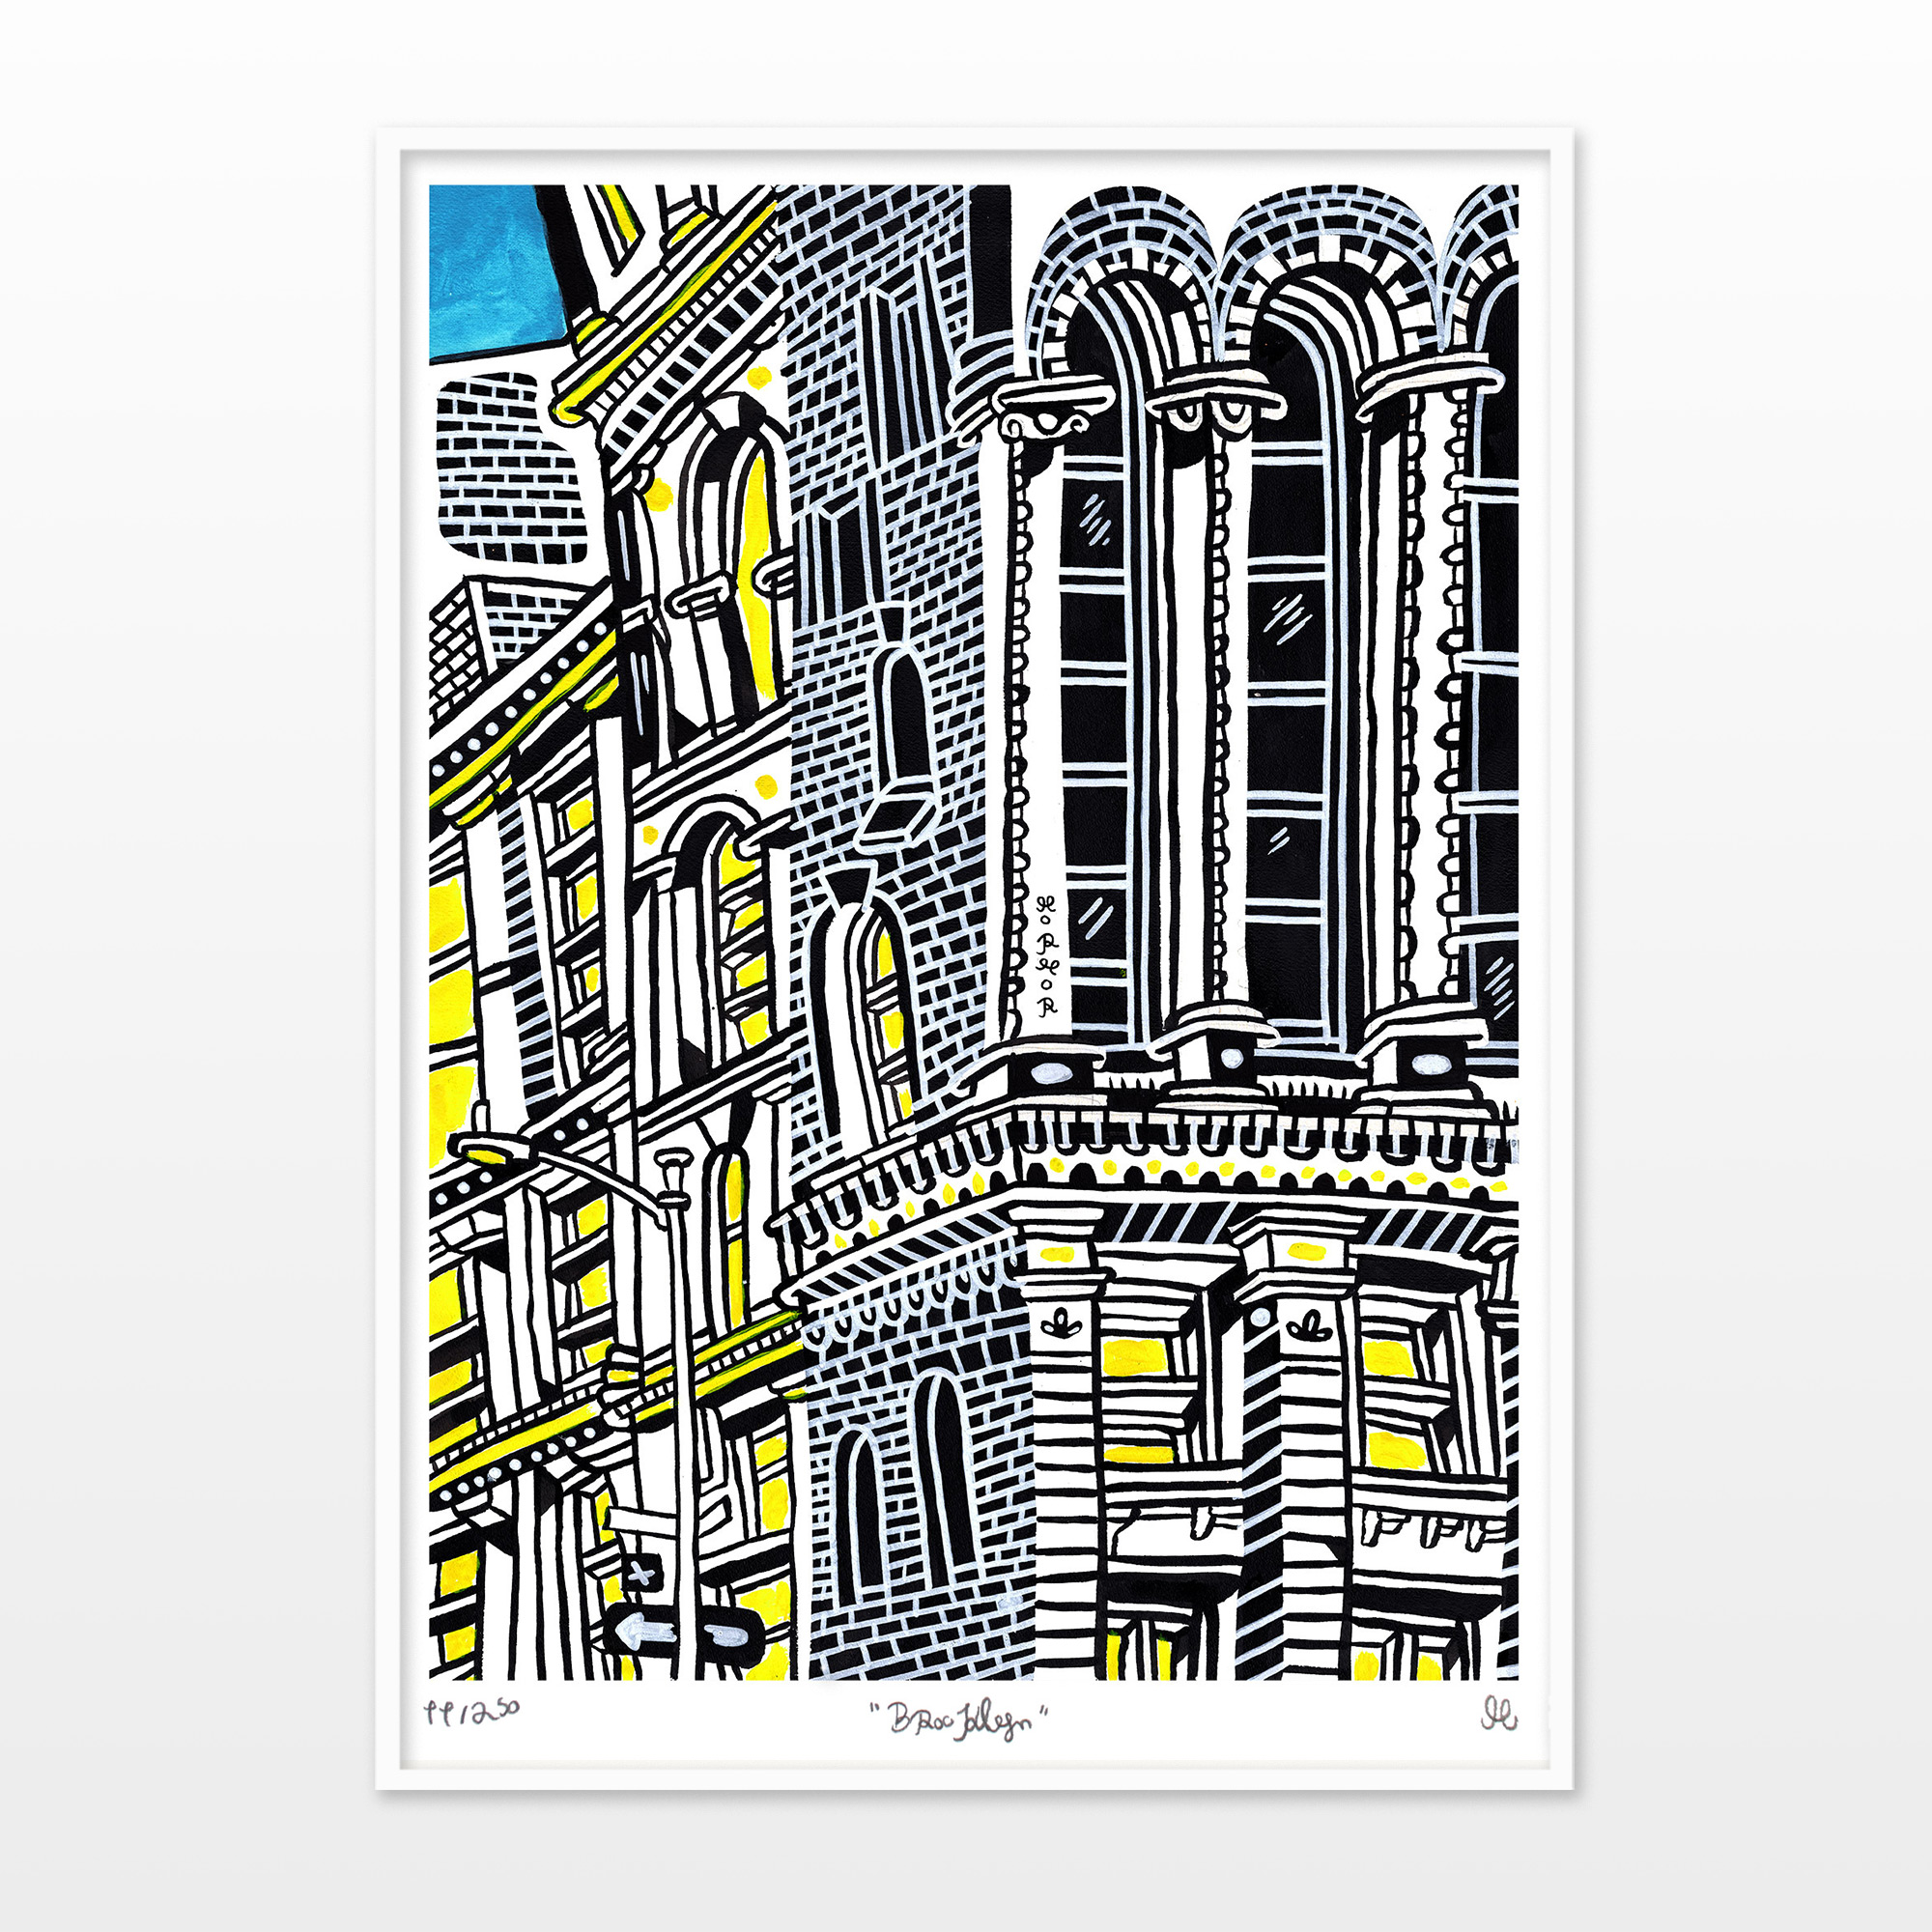 posters-prints, giclee-print, family-friendly, figurative, graphical, illustrative, architecture, cartoons, moods, sky, black, blue, grey, white, yellow, ink, paper, architectural, beautiful, buildings, cities, contemporary-art, copenhagen, danish, decorative, design, interior, interior-design, modern, nordic, posters, prints, scandinavien, street-art, streets, Buy original high quality art. Paintings, drawings, limited edition prints & posters by talented artists.